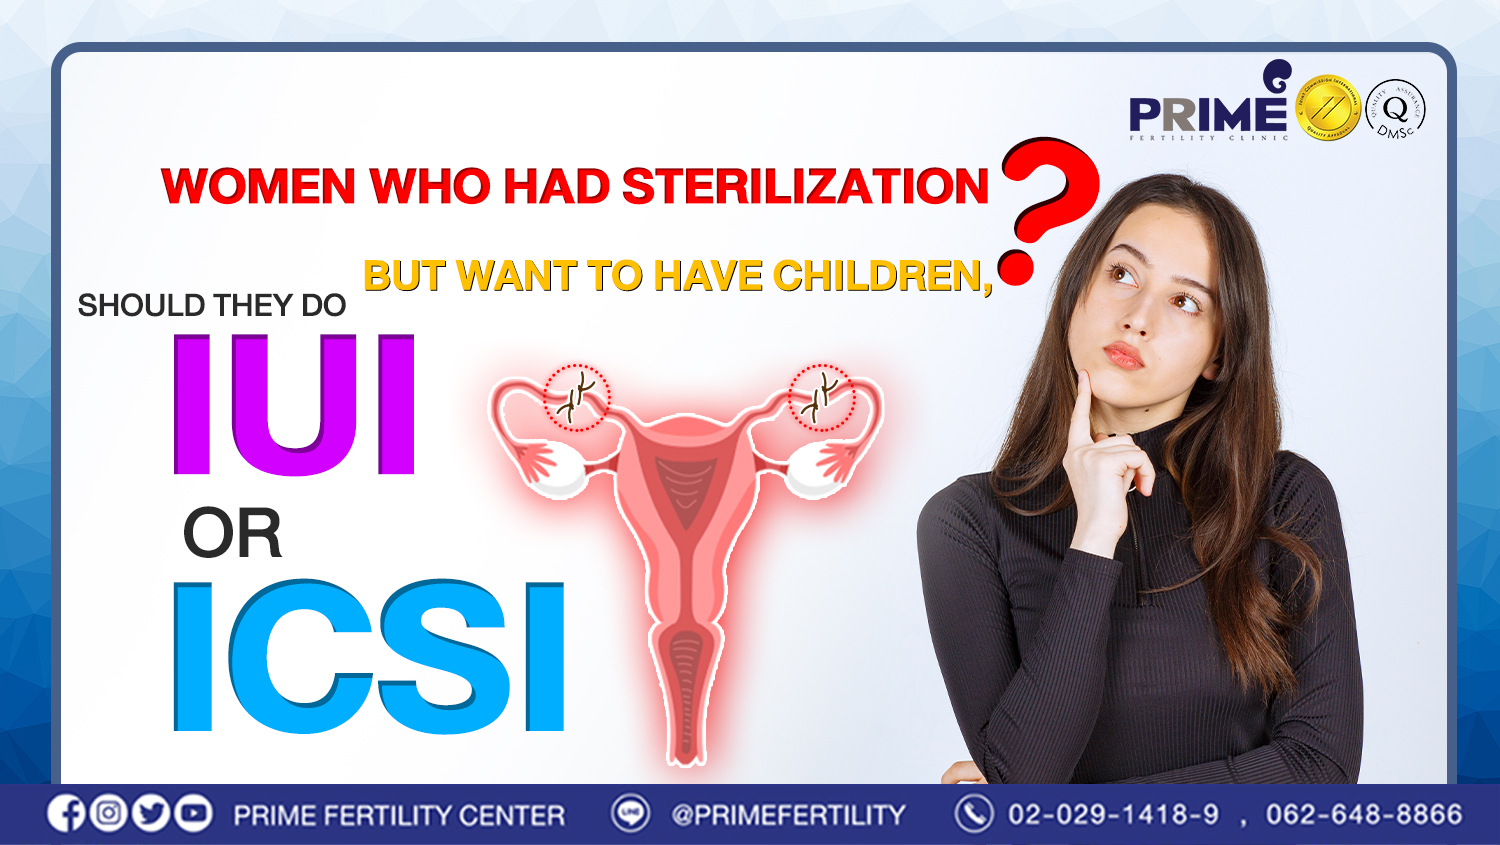 Women who had sterilization but want to have children, should they do IUI or ICSI?